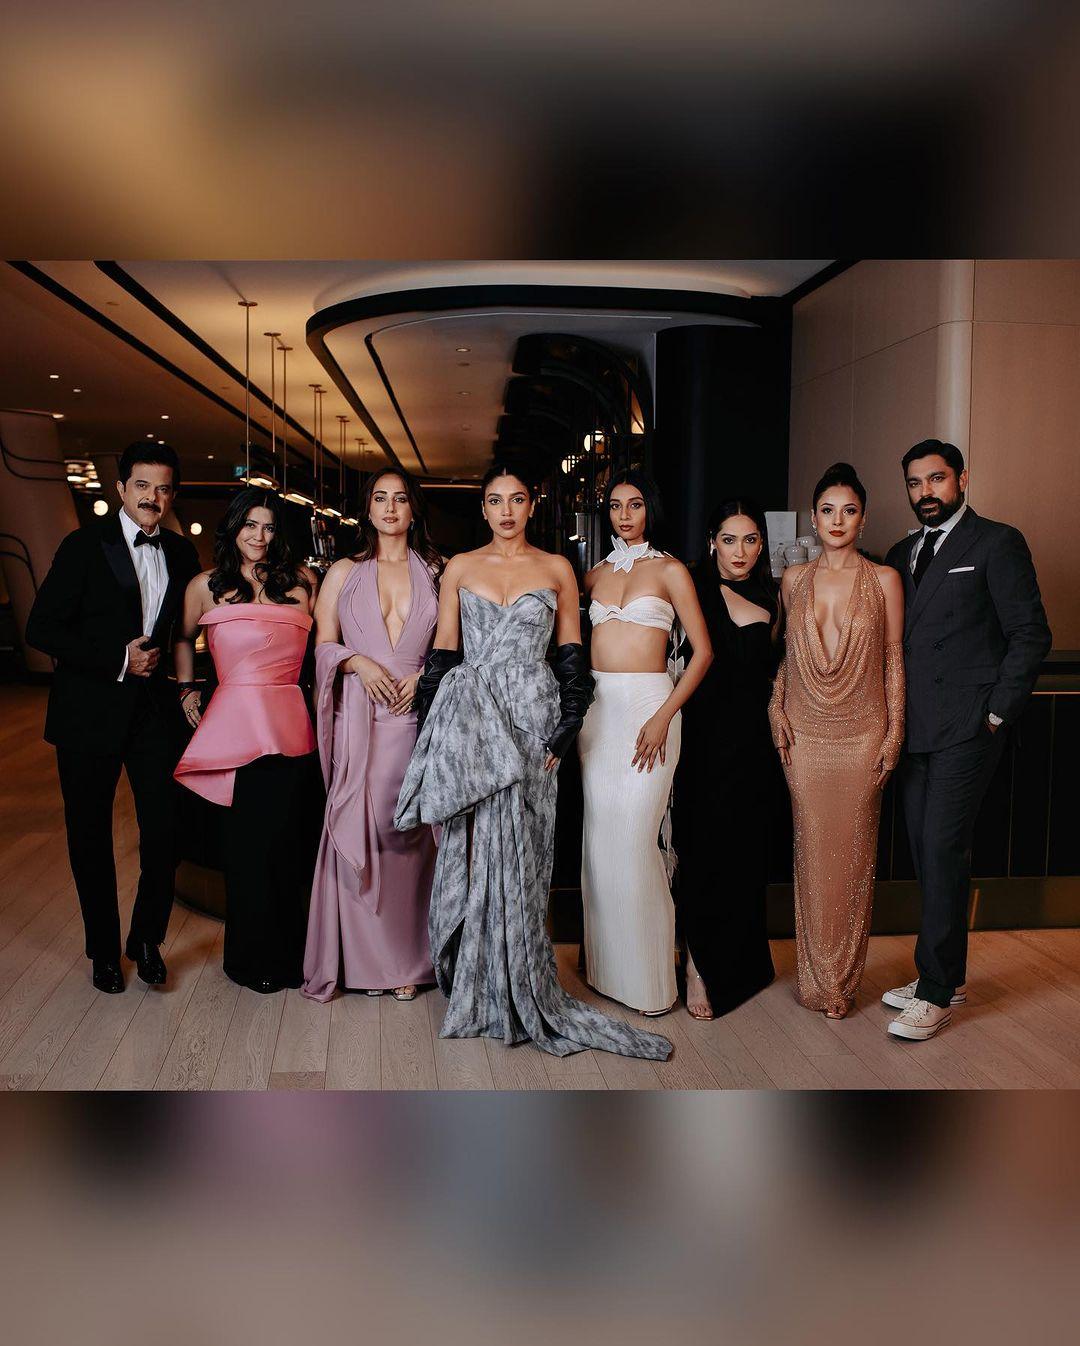 Thank You For Coming, has been creating a whirlwind of excitement with its fun posters and extensive promotional activities. Bhumi Pednekar, Shehnaaz Gill, Dolly Singh, Kusha Kapila and Shibani Bedi have put their best foot forward, let's dive into some of their jaw-dropping looks 